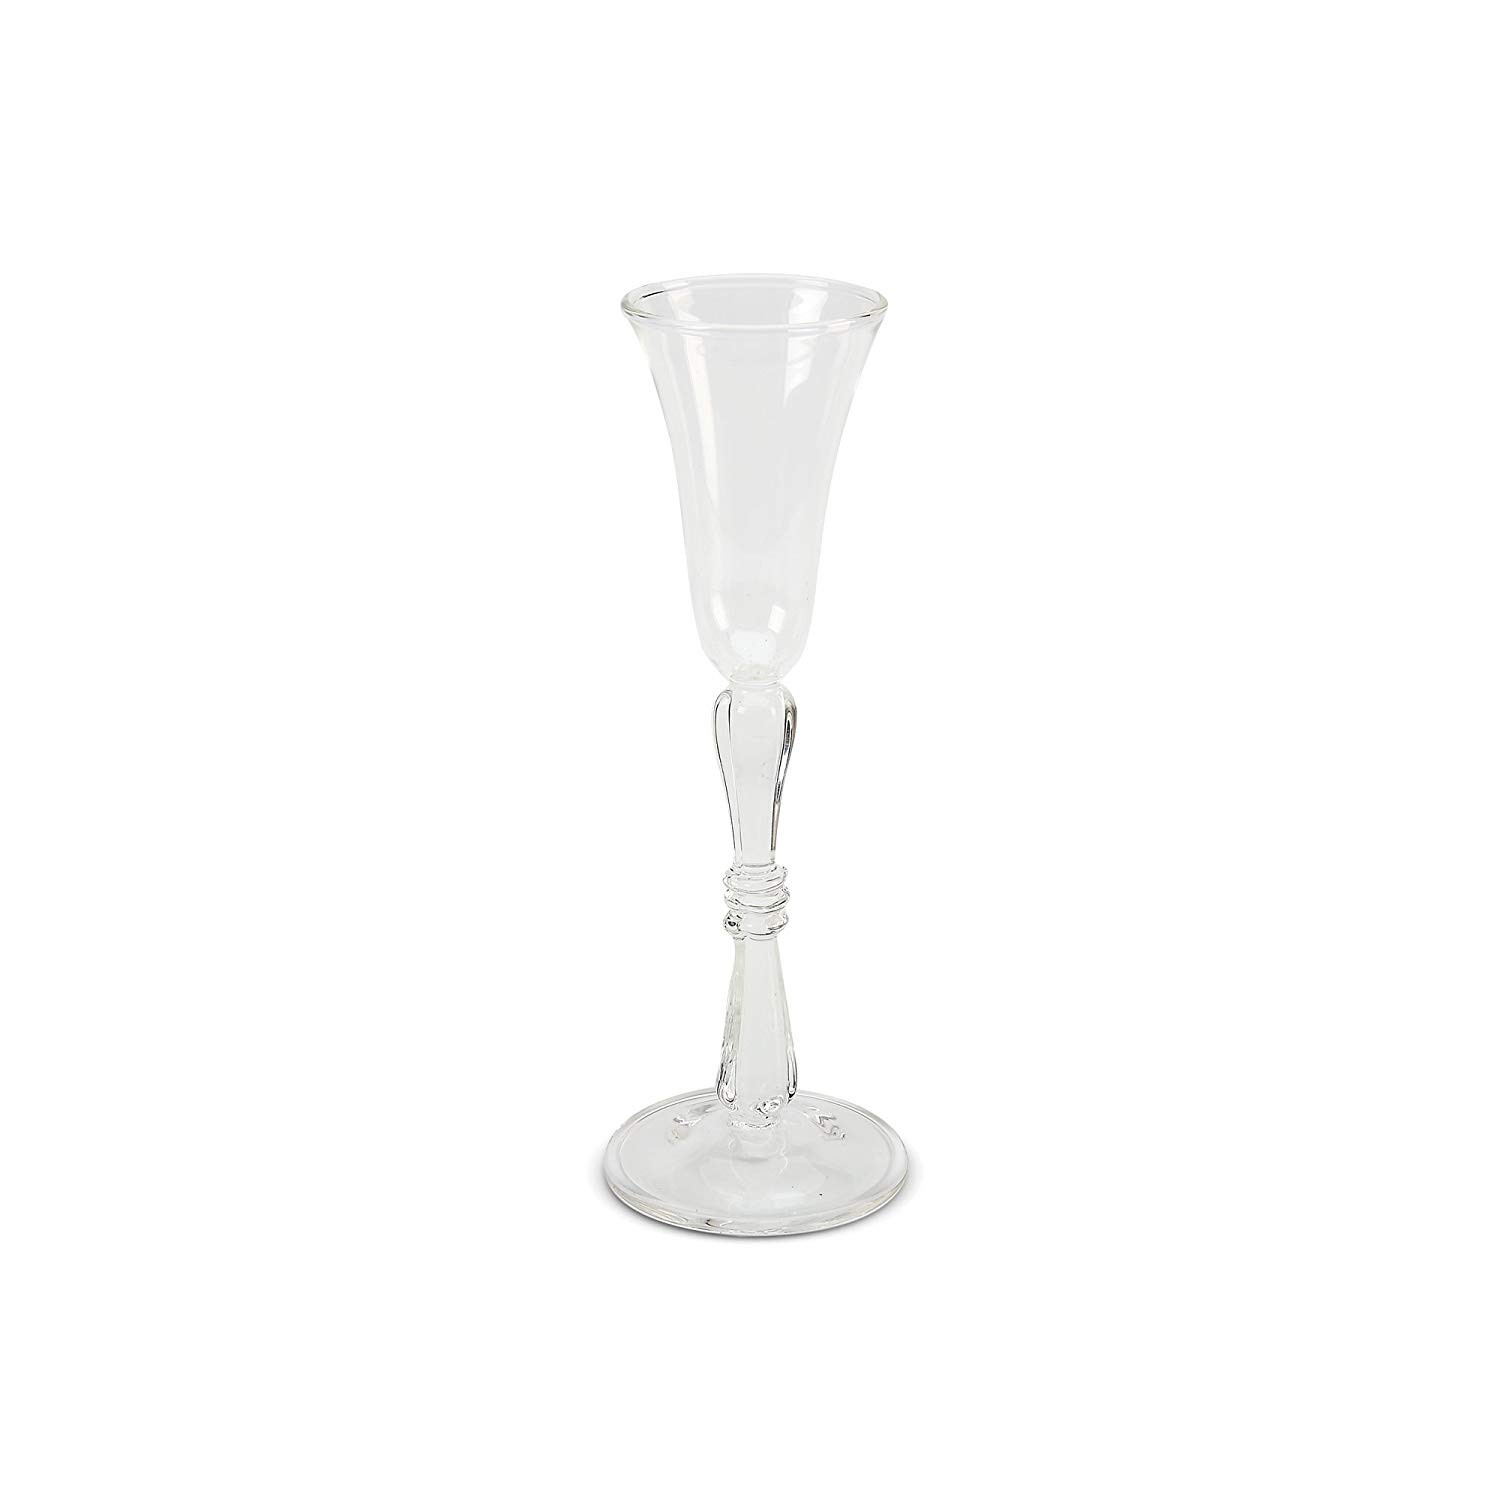 14 Stylish Rcr Crystal Vase 2024 free download rcr crystal vase of amazon com impulse pimlico cordial set of 4 clear cordial intended for amazon com impulse pimlico cordial set of 4 clear cordial liqueur glasses